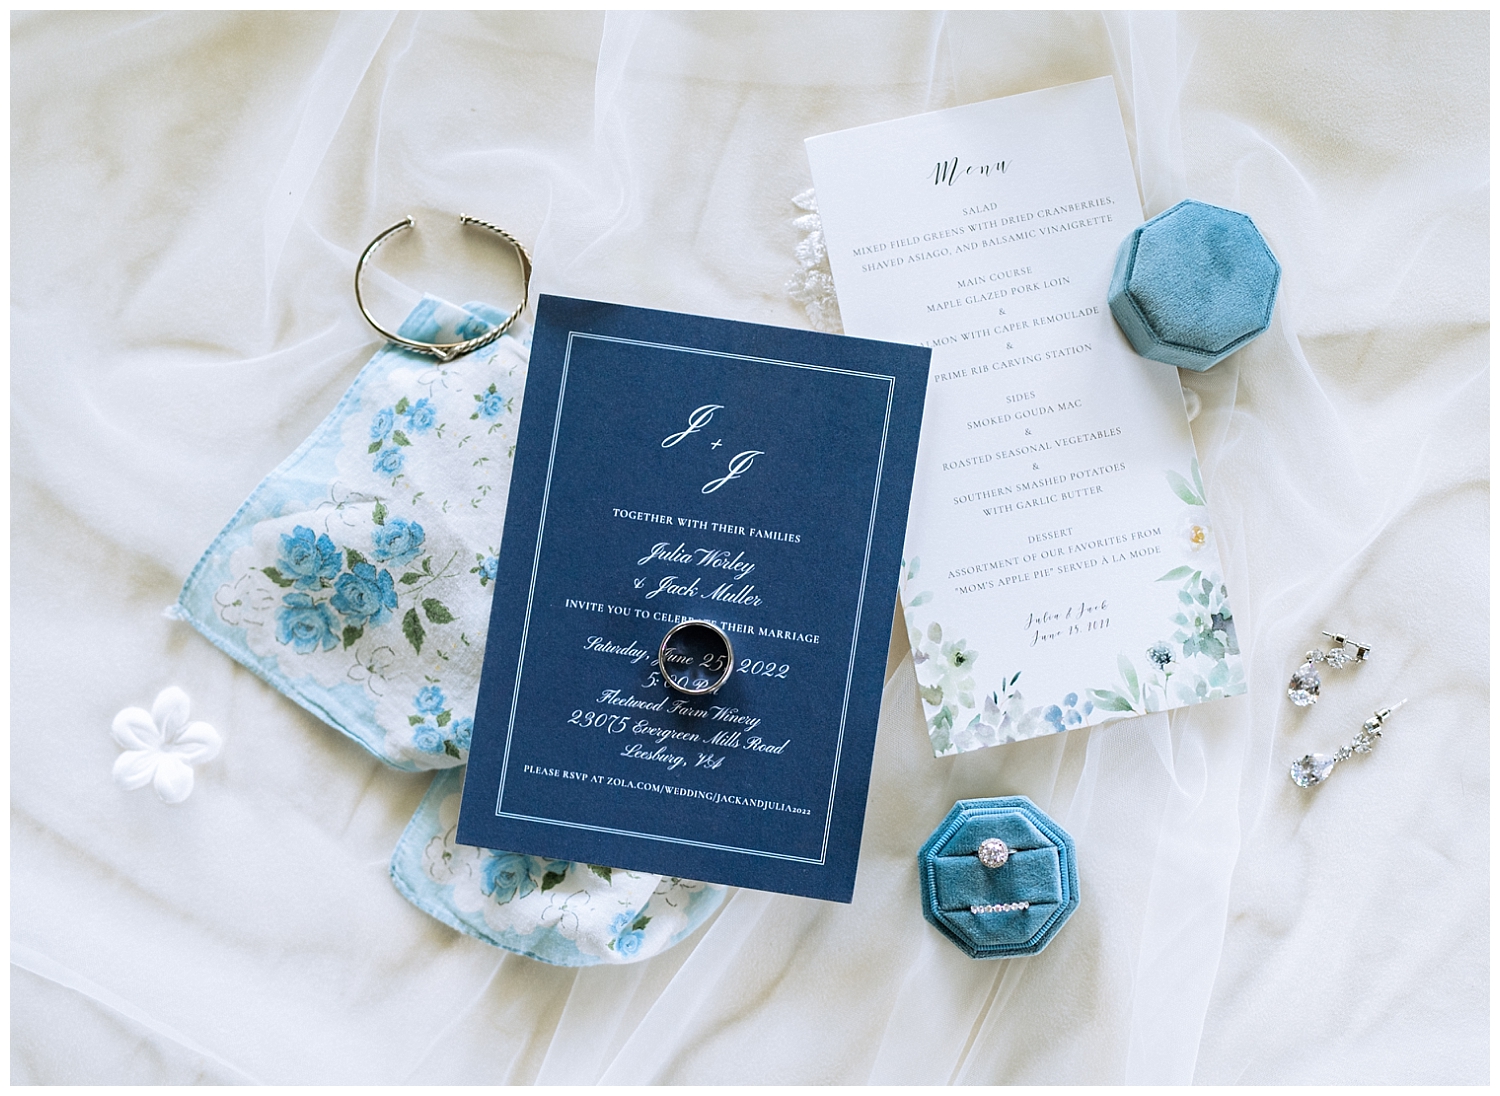 Bridal details and invitation suite at Fleetwood Farm Winery wedding in Leesburg, Virginia